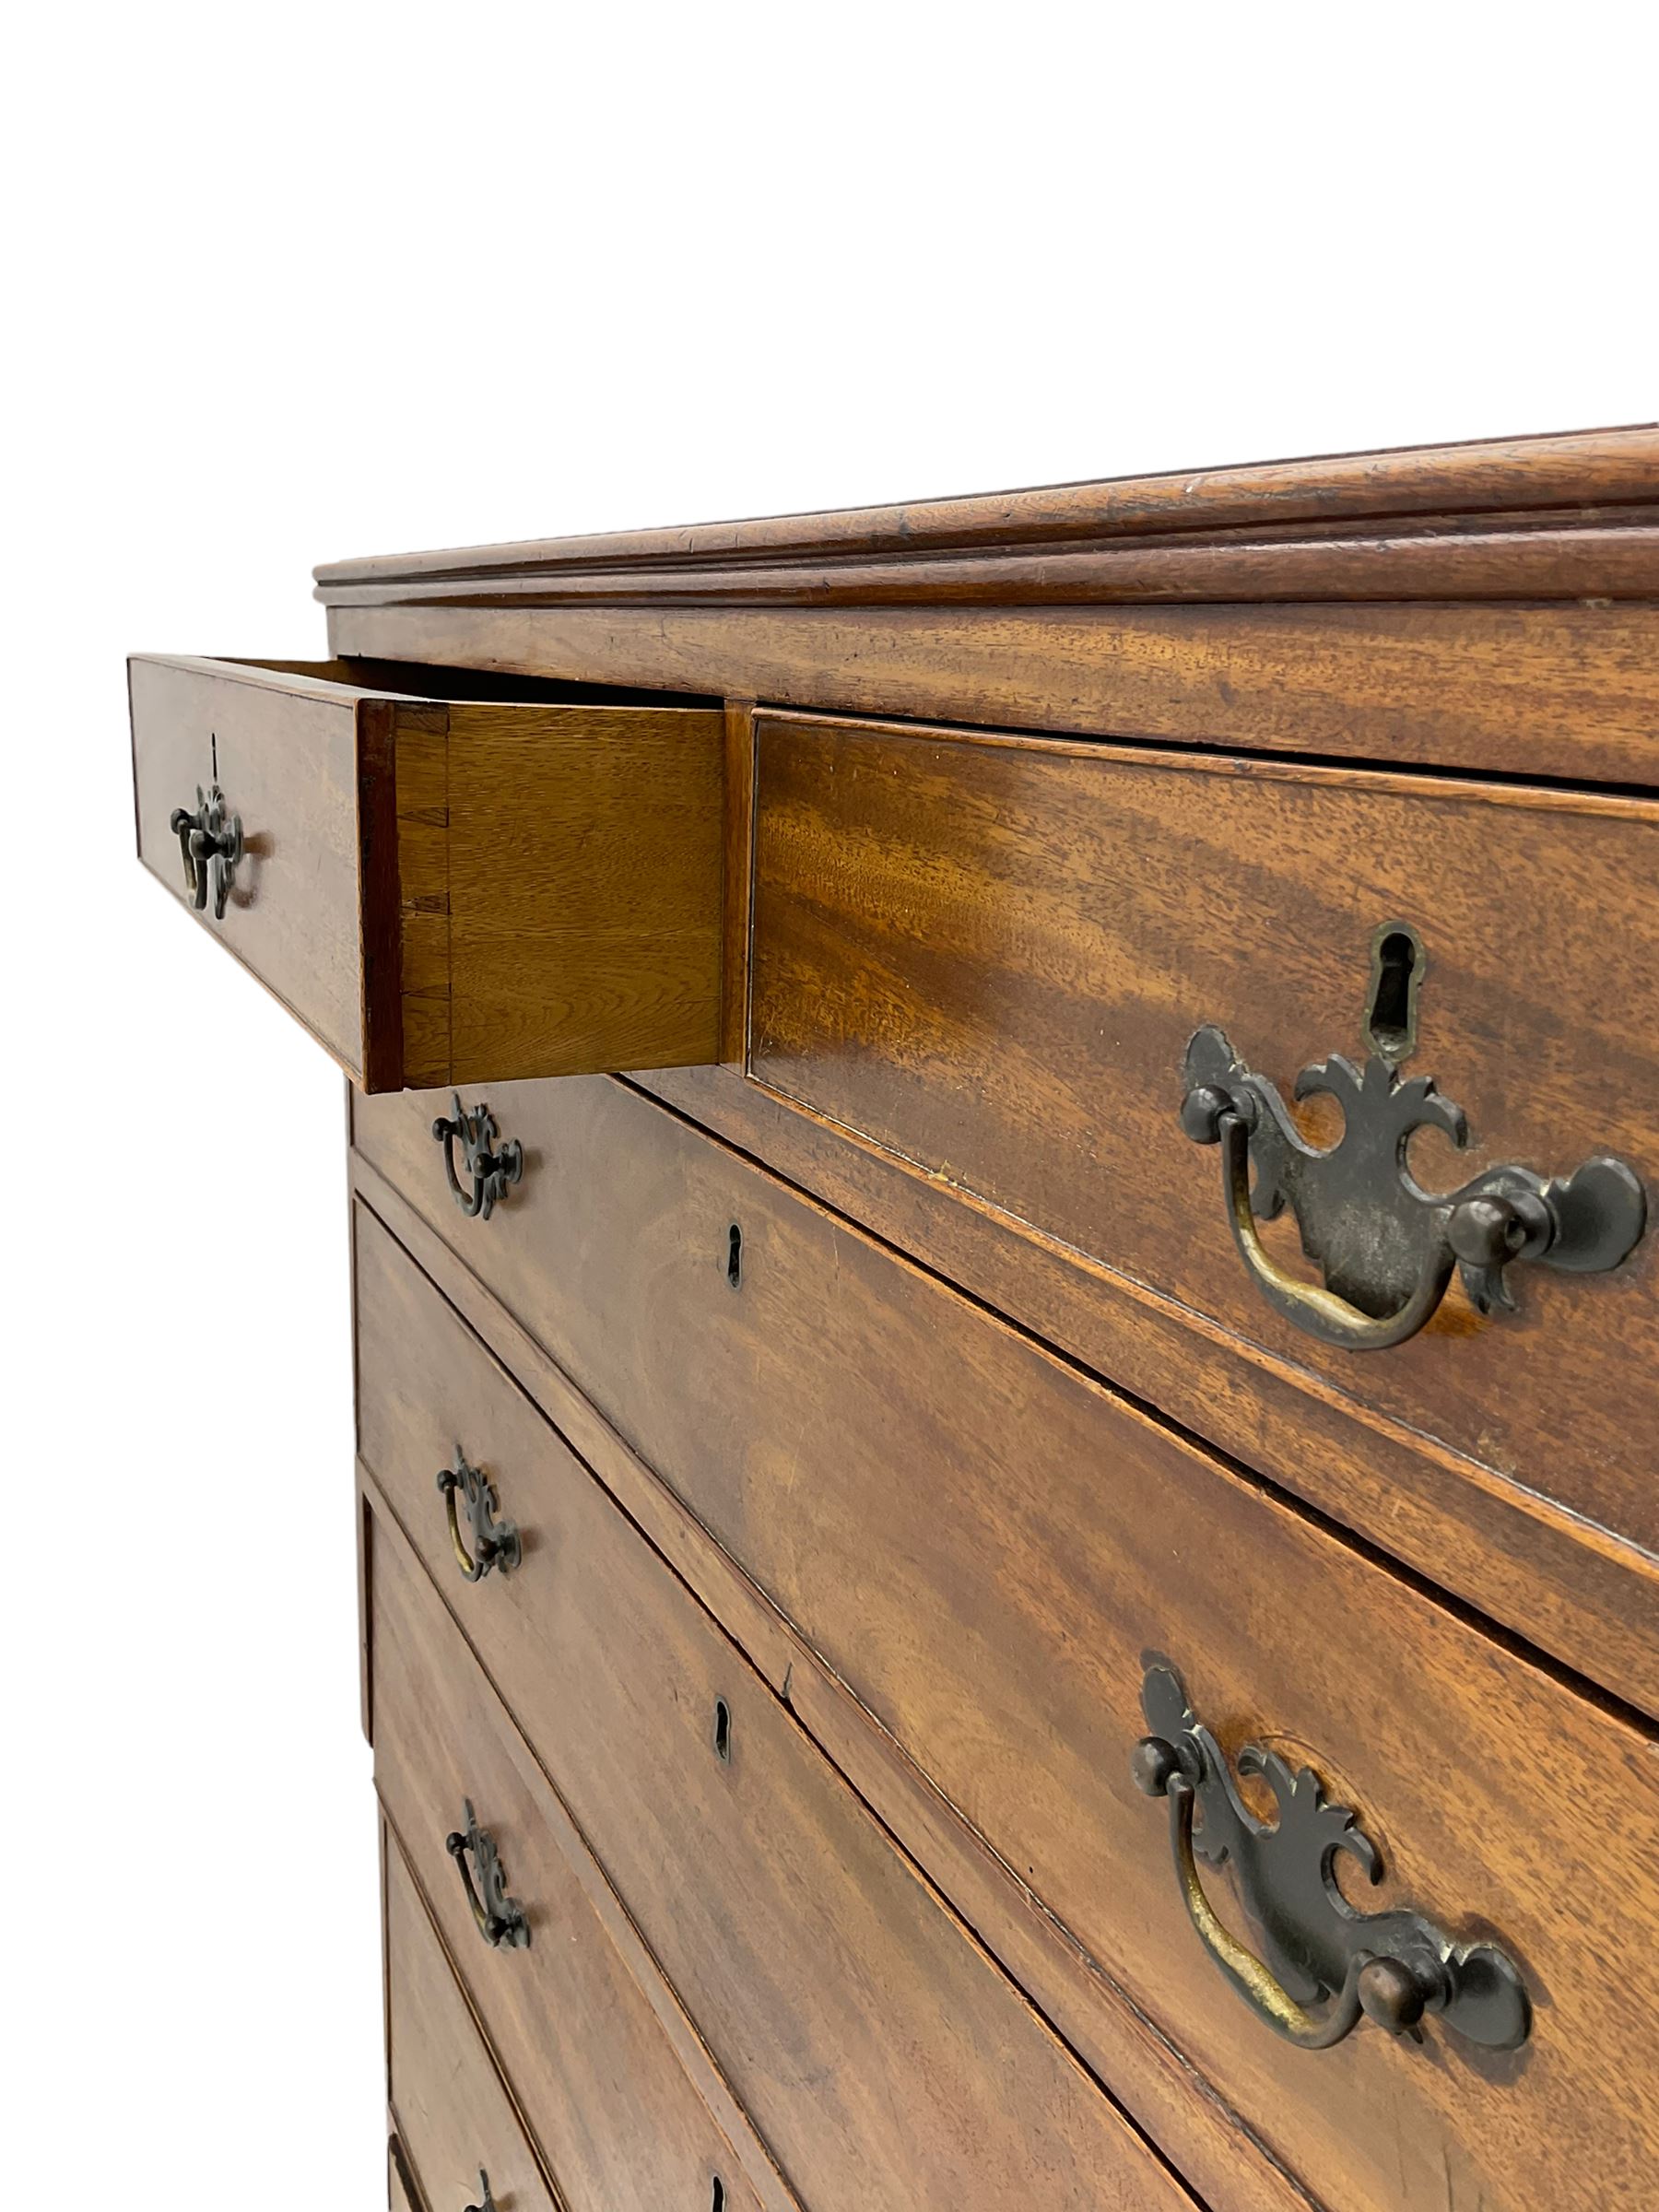 19th century mahogany straight front chest - Image 2 of 8